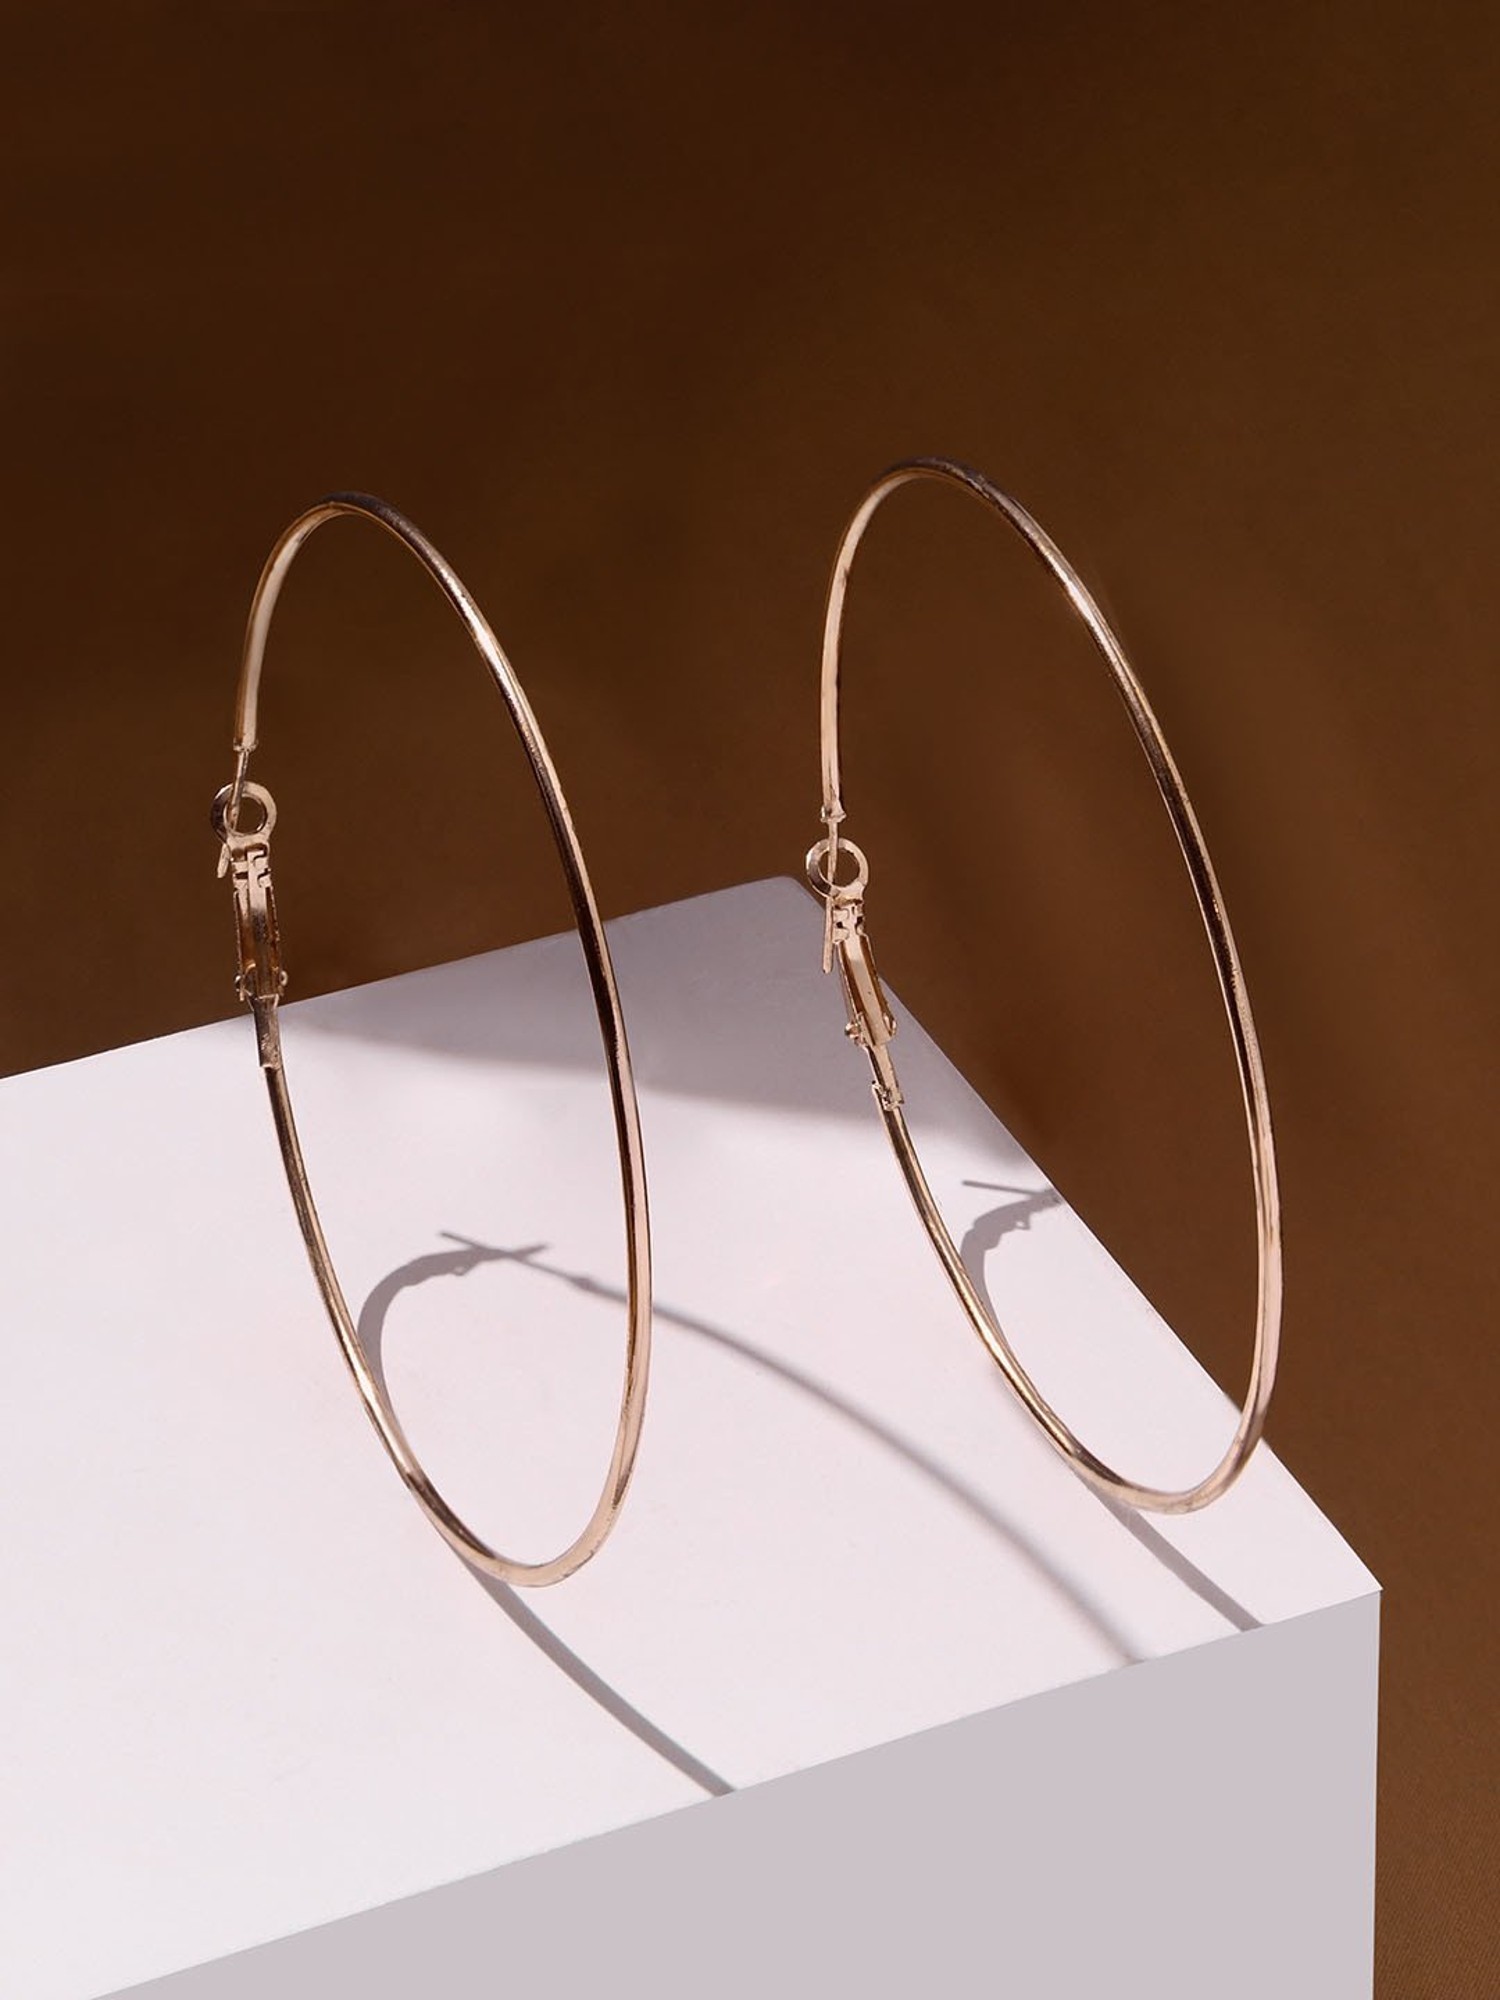 Yellow Chimes Swarovski Classic Designer Silver Plated Stylish Hoop Earrings  Buy Yellow Chimes Swarovski Classic Designer Silver Plated Stylish Hoop  Earrings Online at Best Price in India  Nykaa